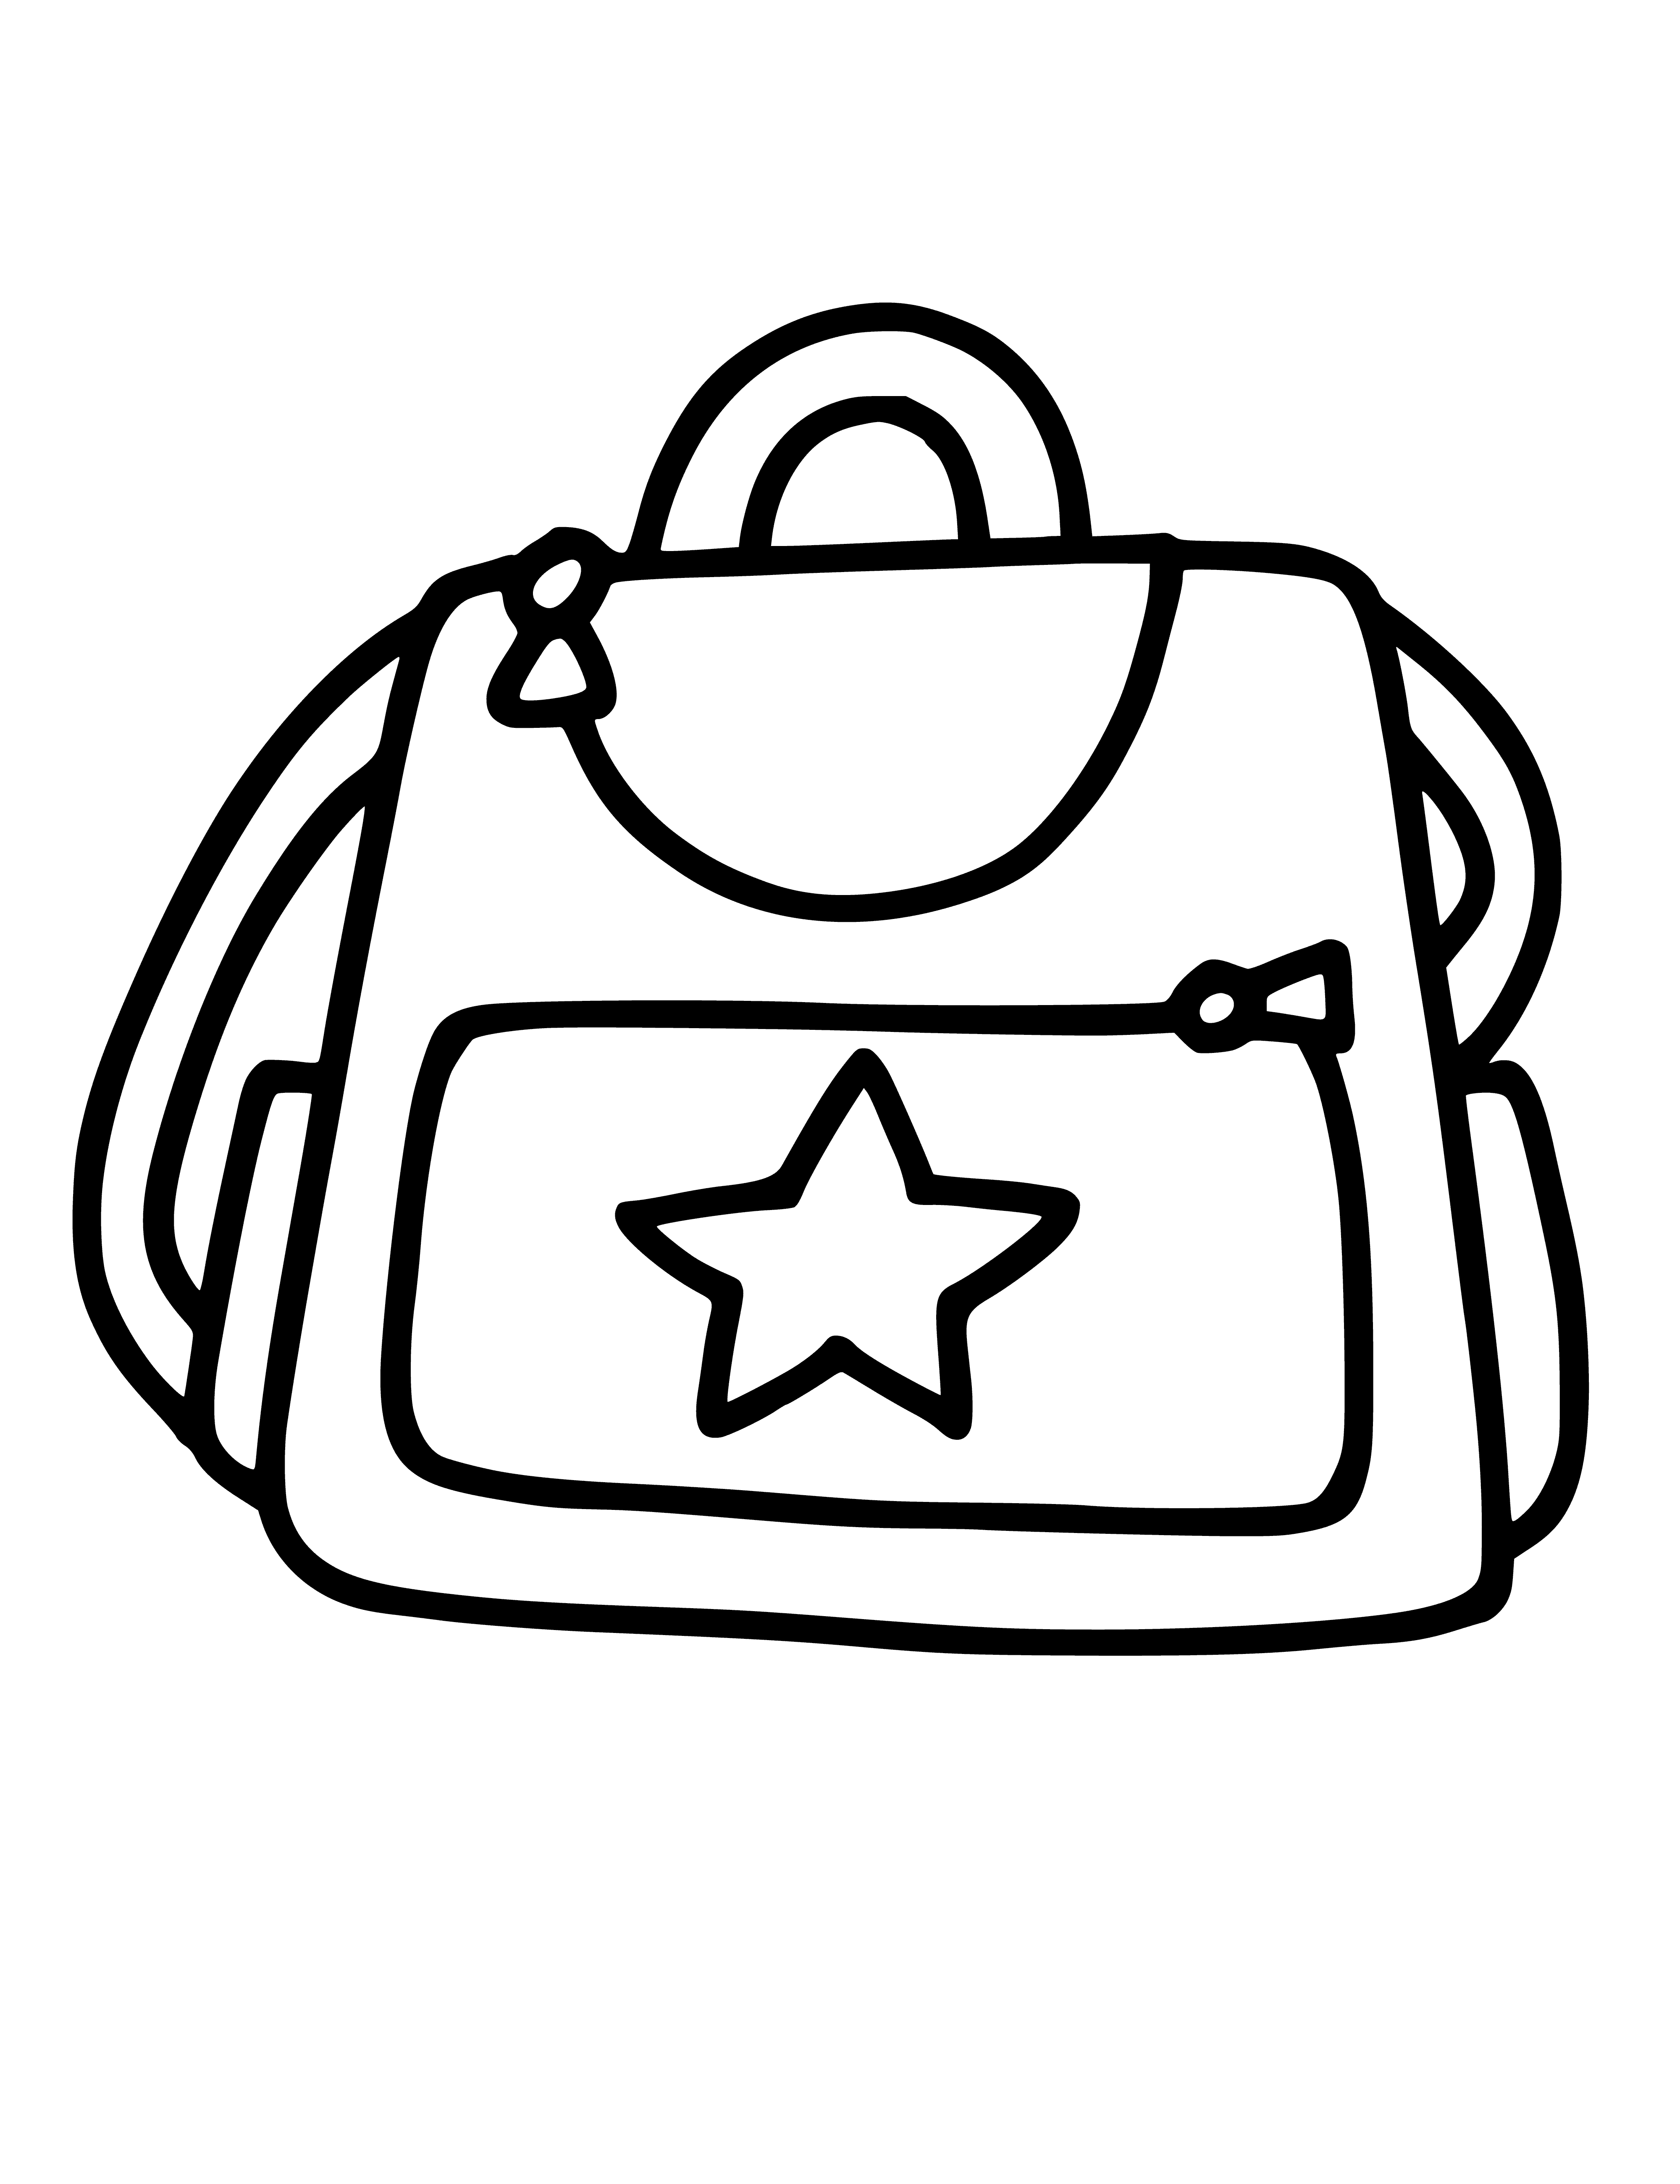 coloring page: 3 coloring pages: briefcase with handle & zipper, buckle straps, & snap buttons.